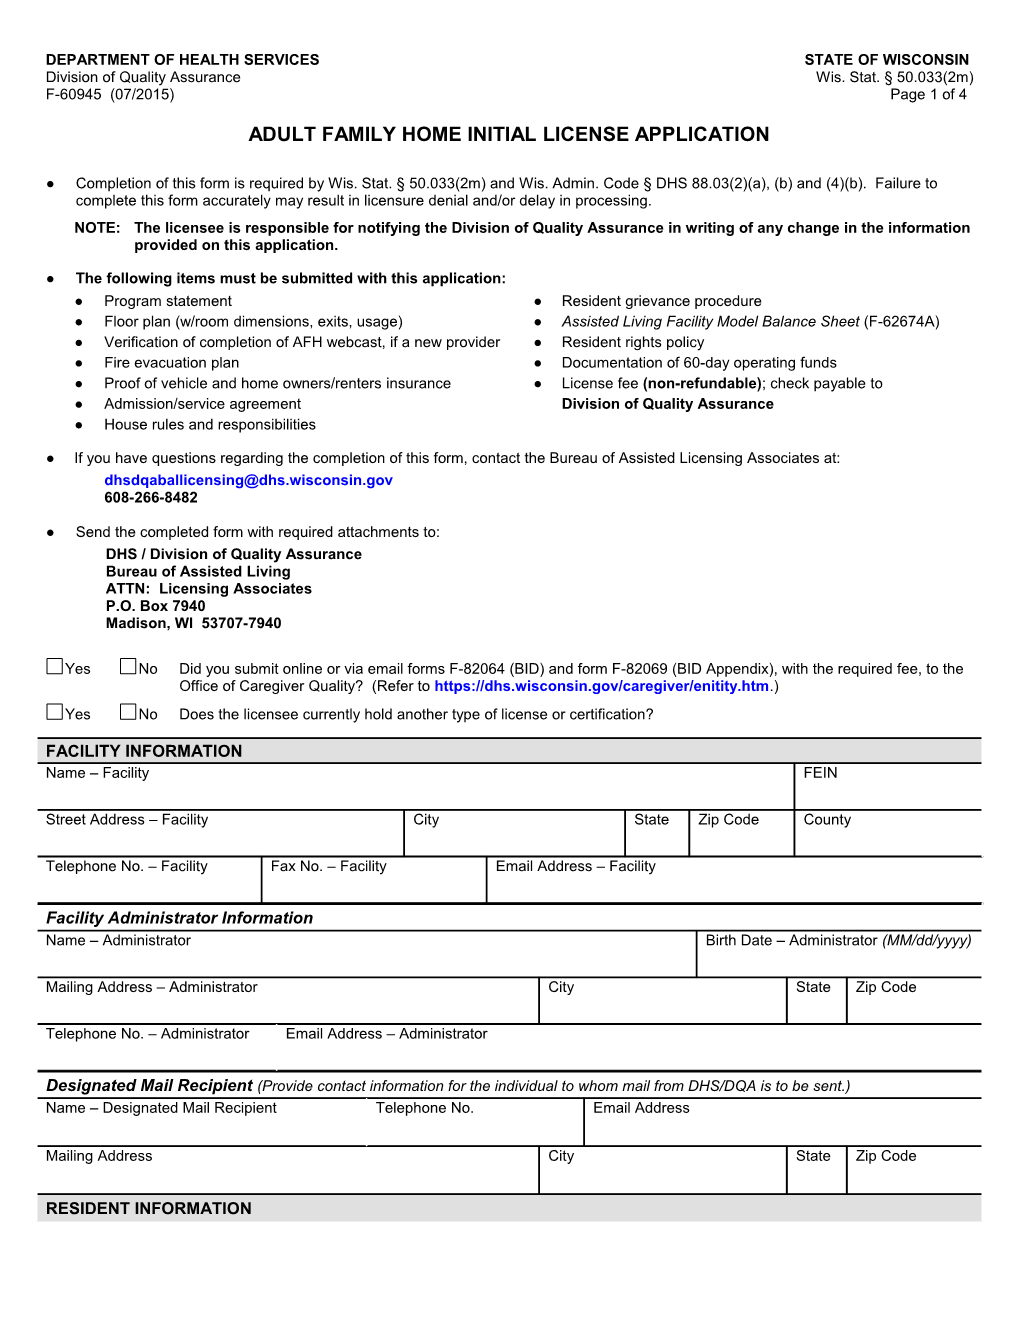 Adult Family Home Initial License Application, F-60945